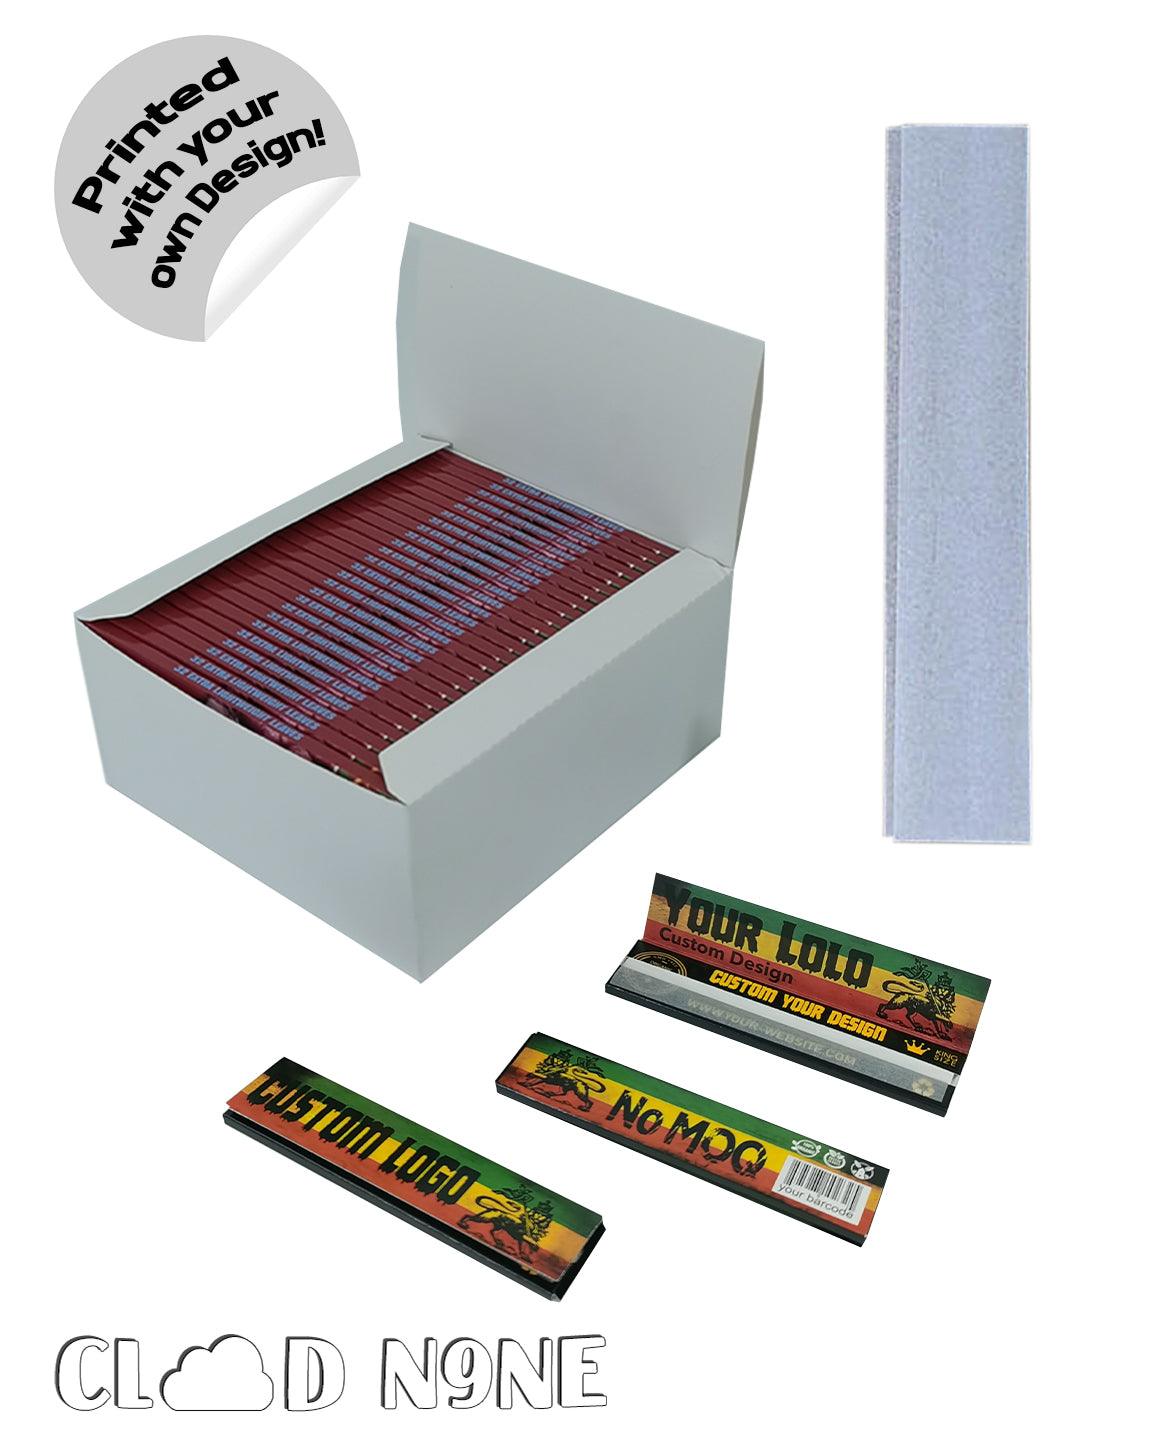 Custom King Sized Rolling Papers - With Custom Display Box - CloudNine